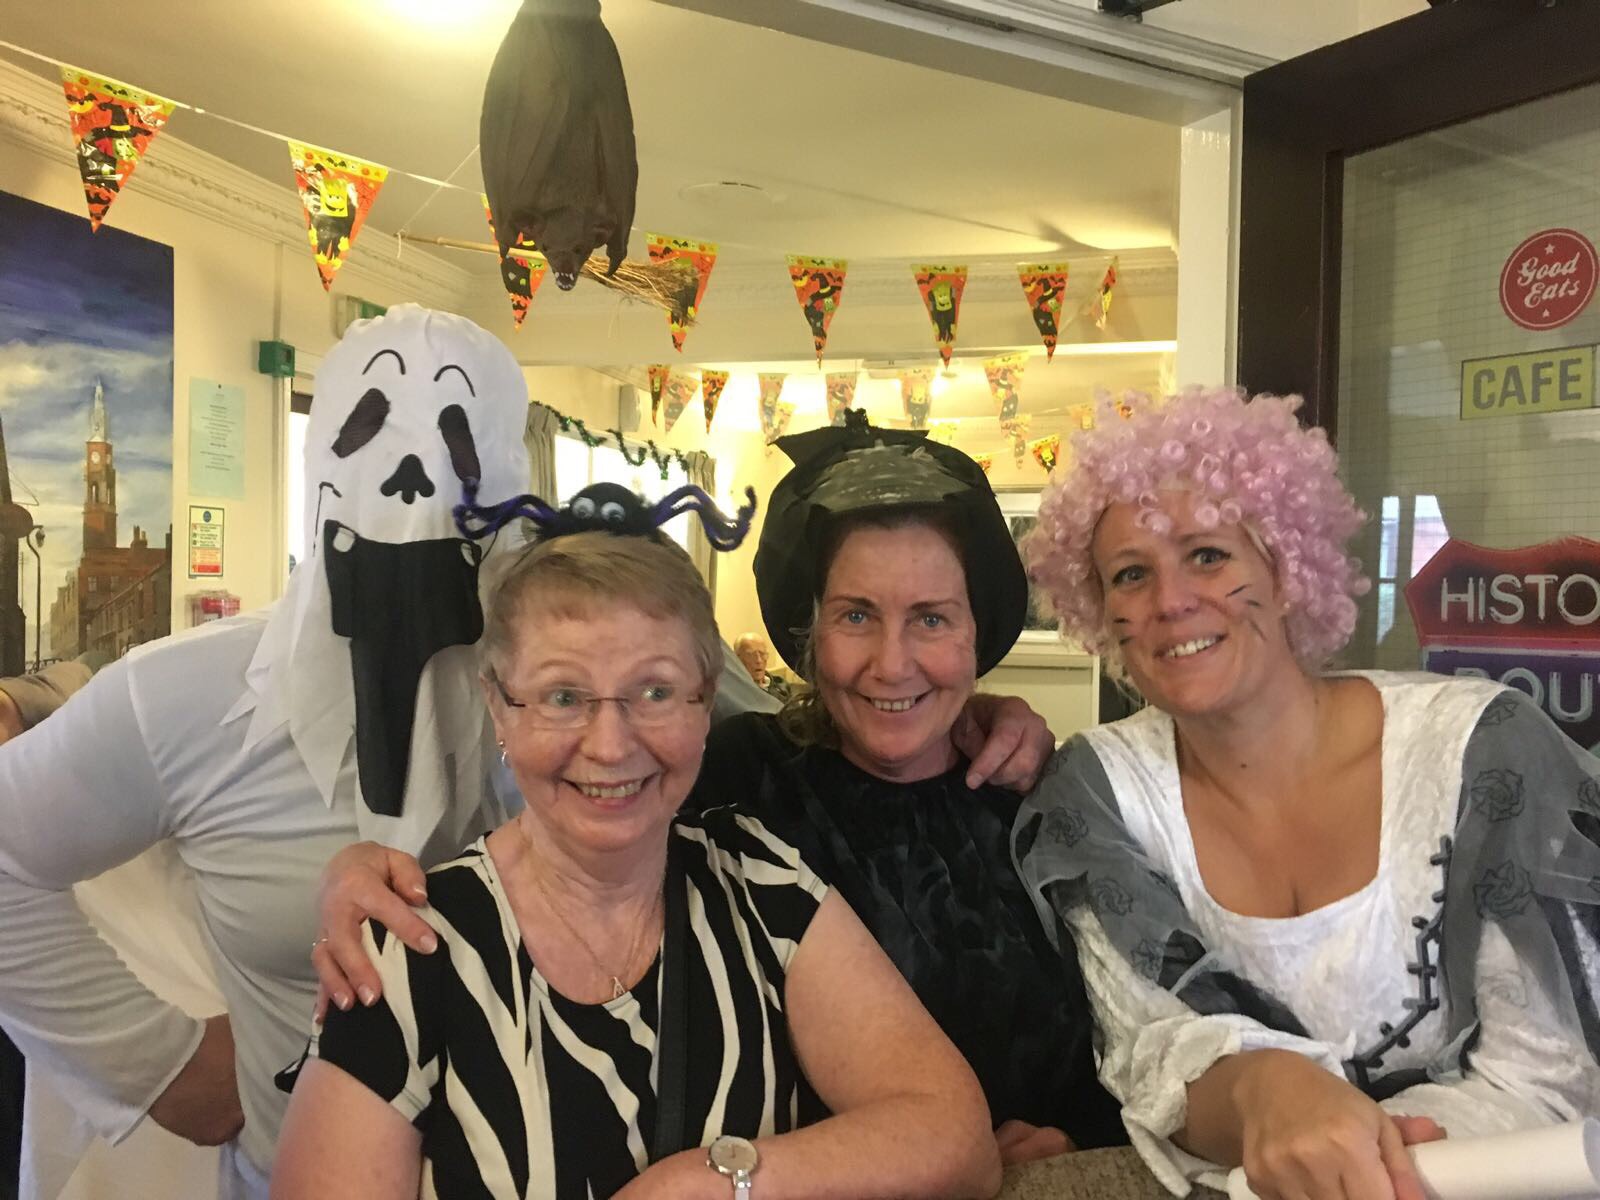 Halloween Fancy Dress at Elizabeth Court Care Centre: Key Healthcare is dedicated to caring for elderly residents in safe. We have multiple dementia care homes including our care home middlesbrough, our care home St. Helen and care home saltburn. We excel in monitoring and improving care levels.